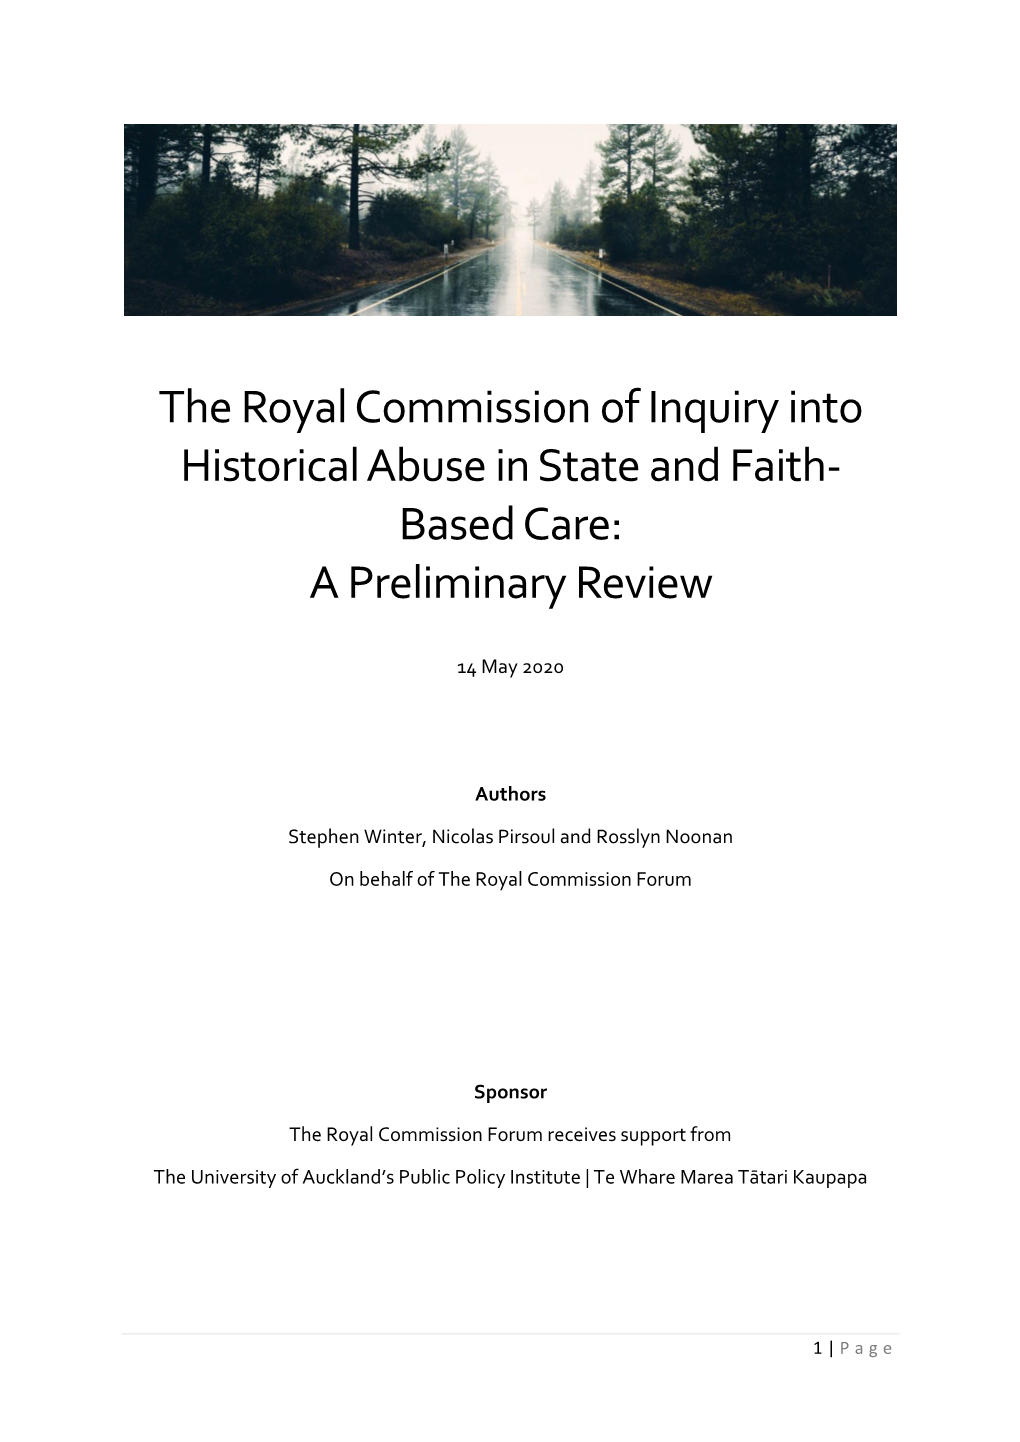 The Royal Commission of Inquiry Into Historical Abuse in State and Faith- Based Care: a Preliminary Review